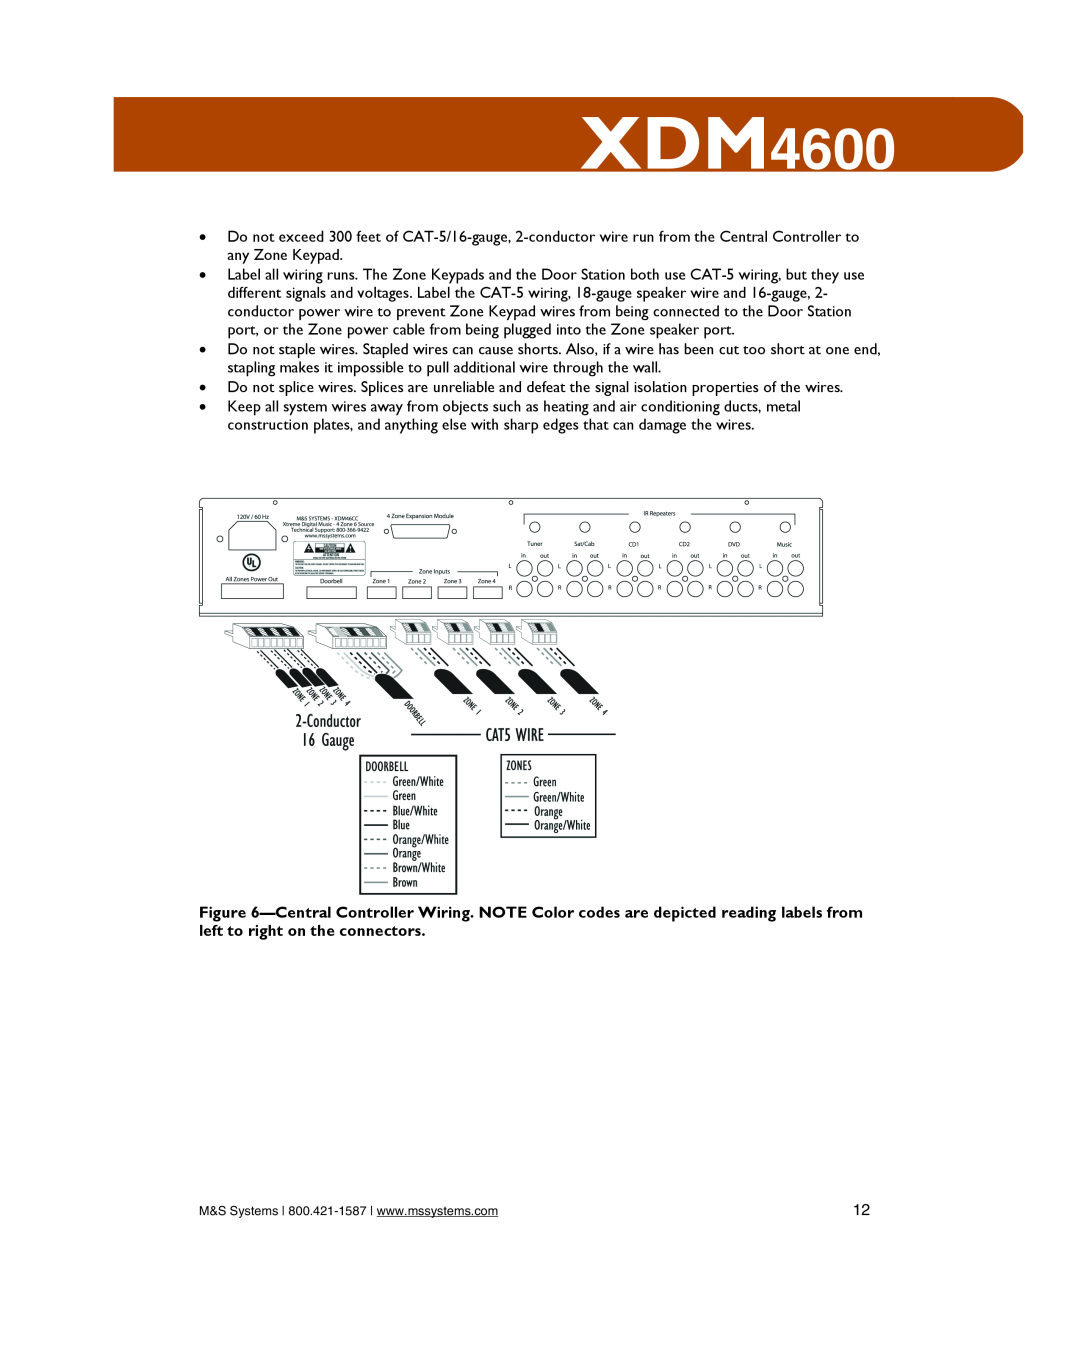 M&S Systems XDM4600 owner manual 